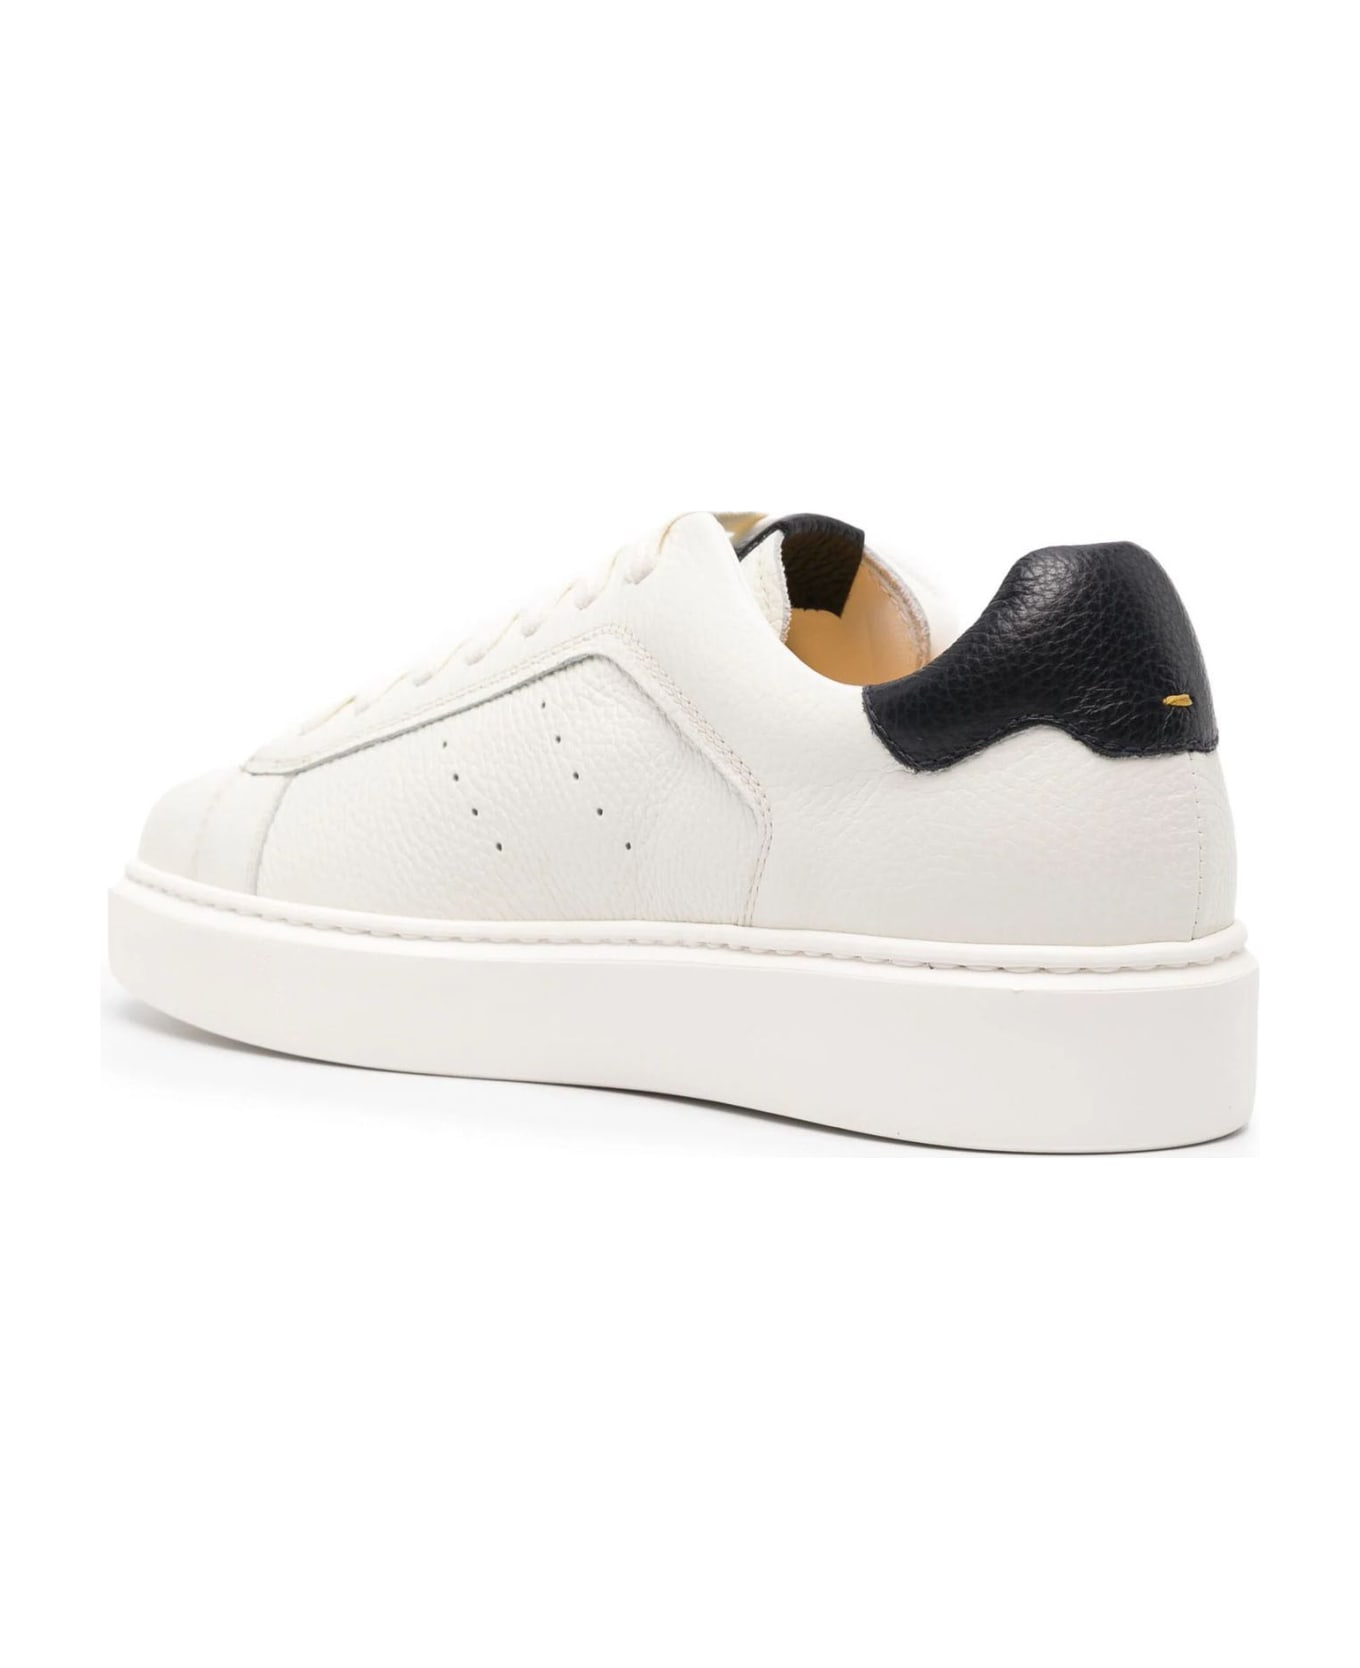 Doucal's White Calf Leather Sneakers - Panna